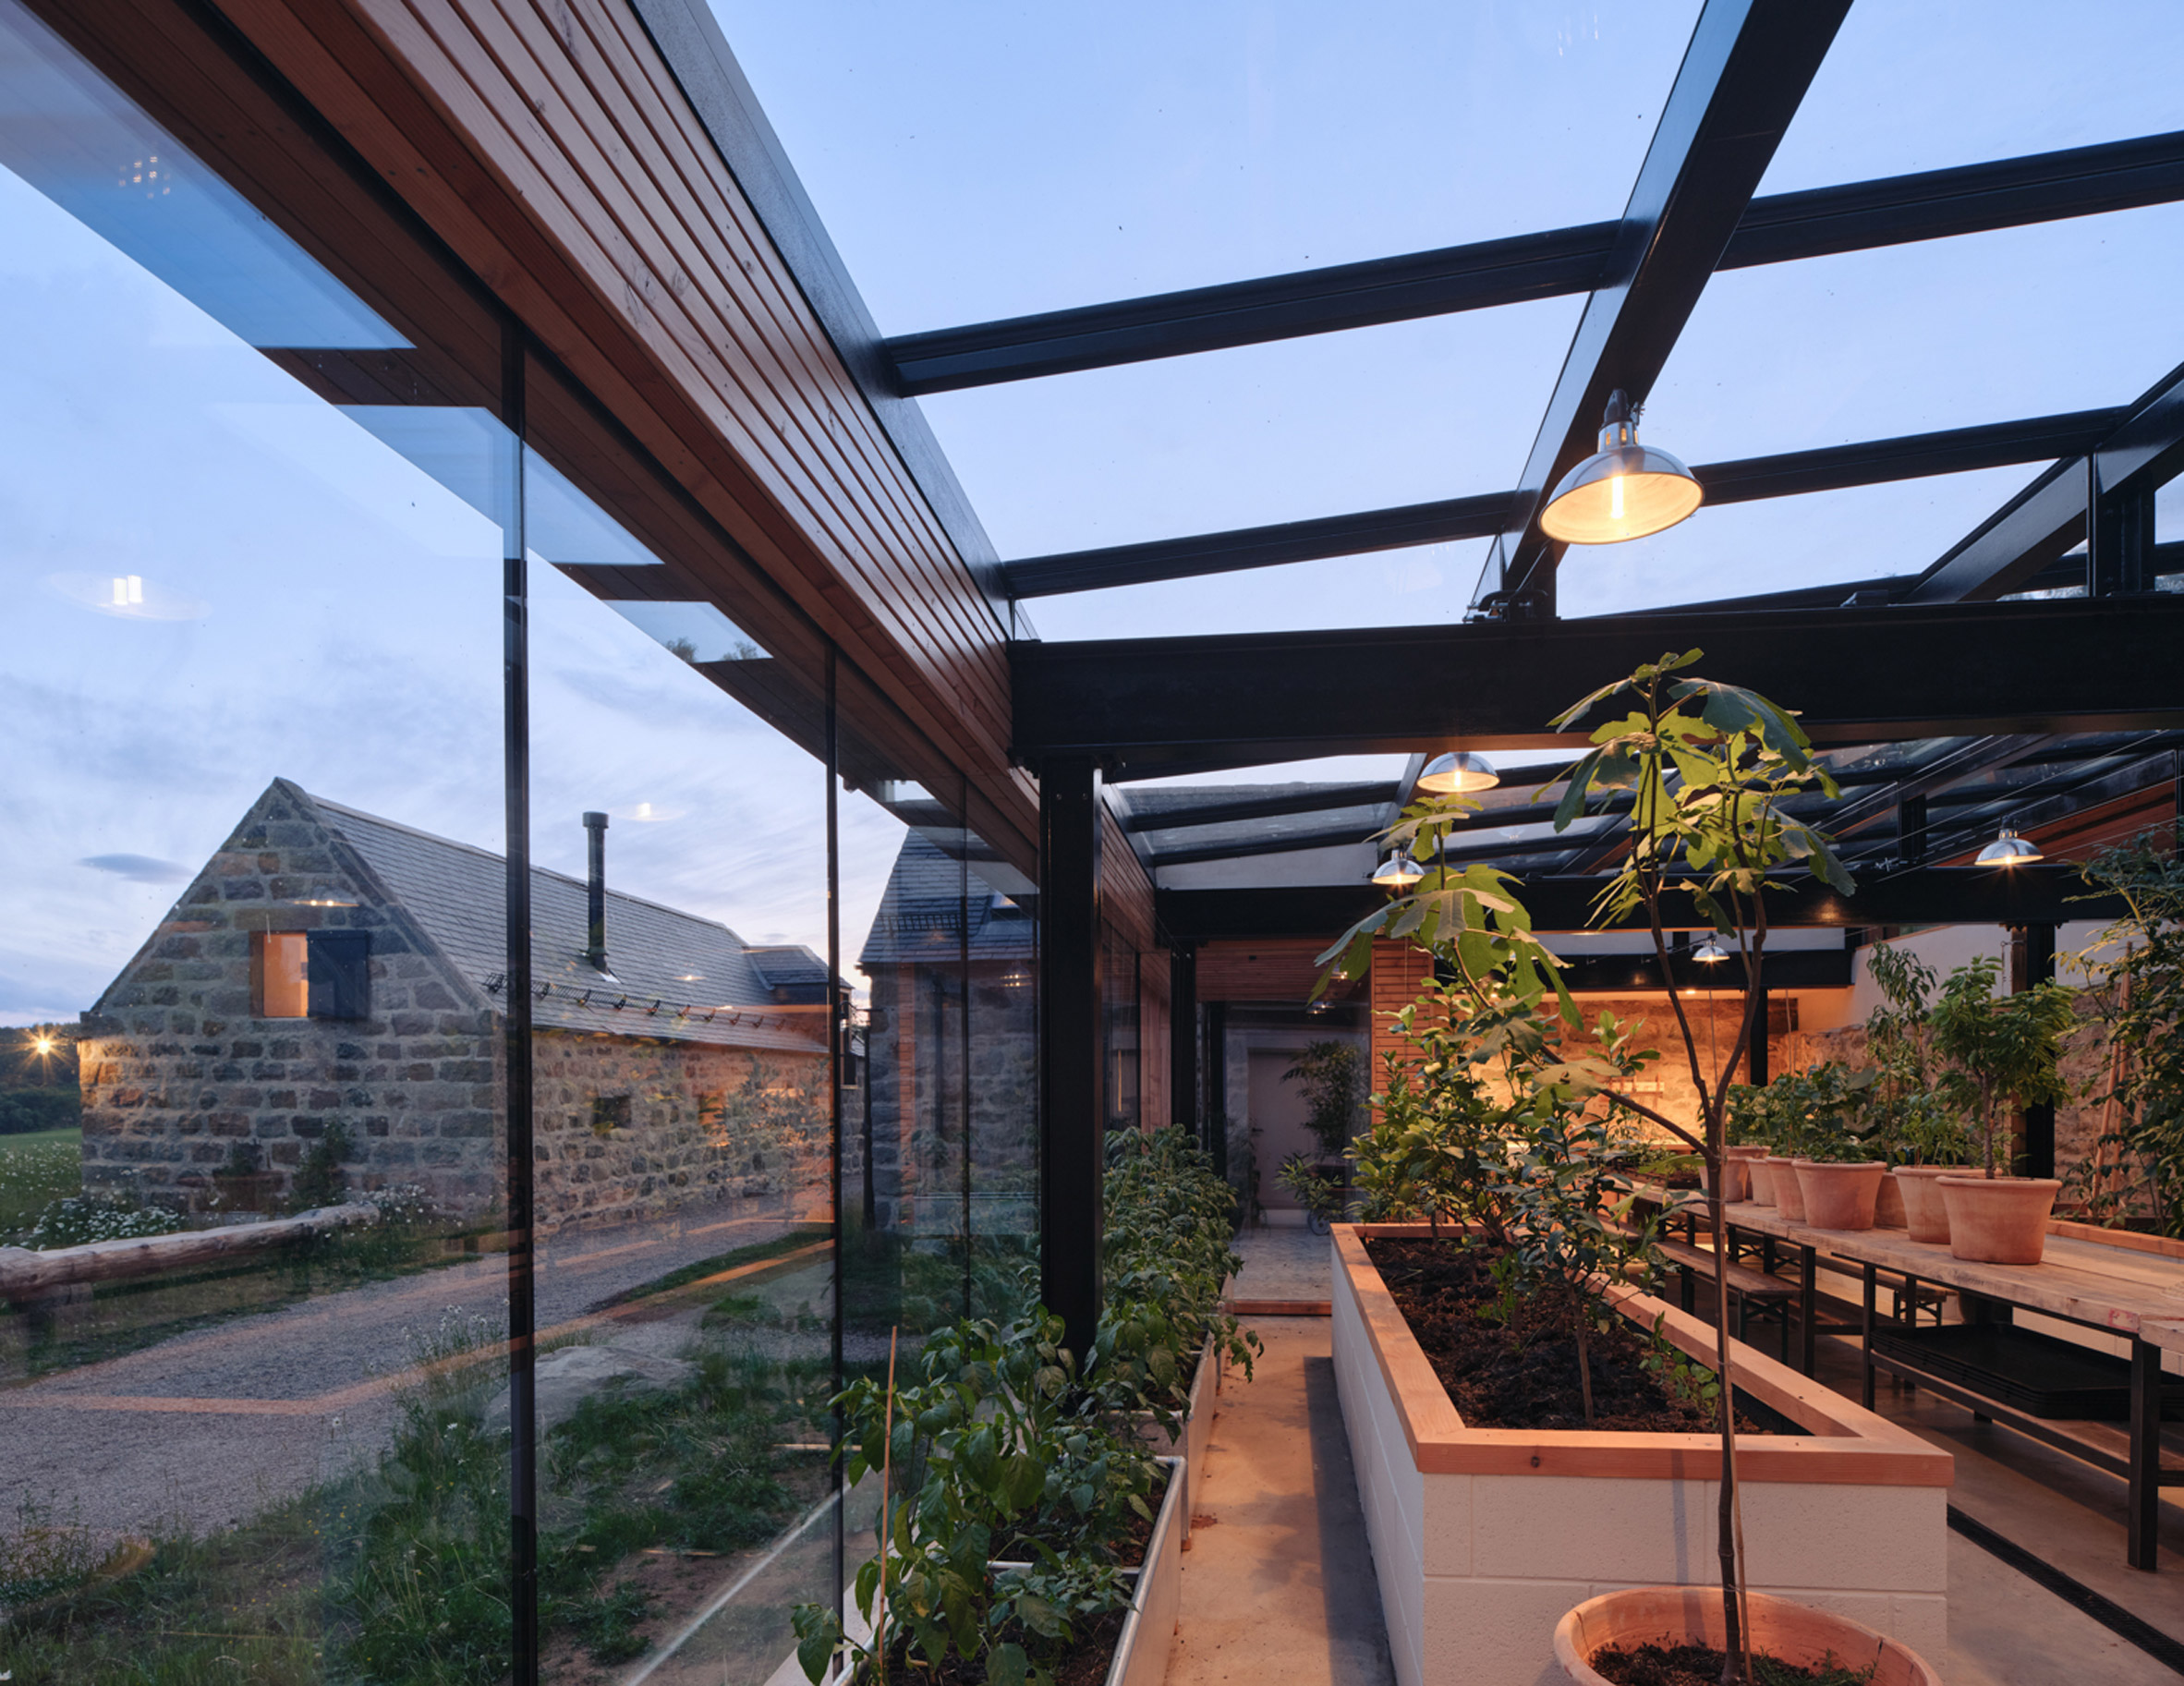 A glasshouse with a glazed wall extension